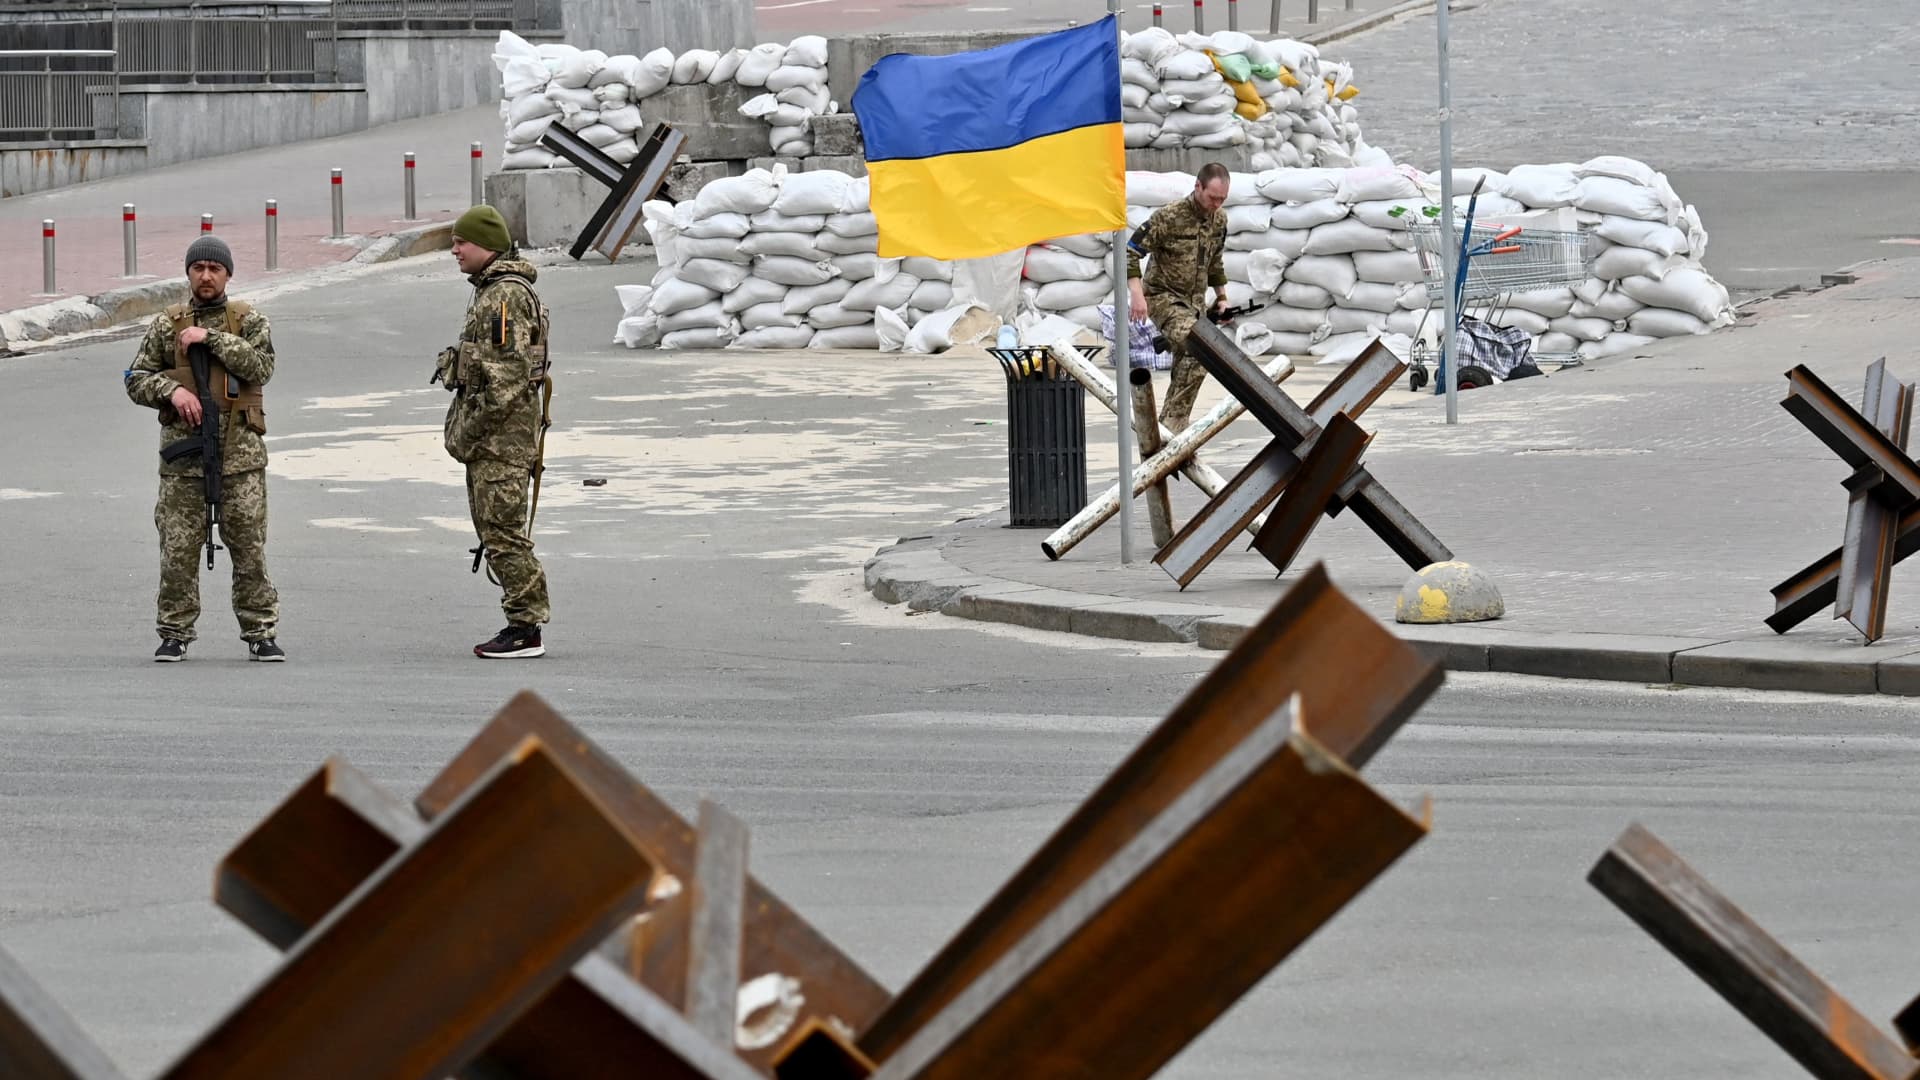 Ukrainian soldiers stand guard at Independence Square in Kyiv on March 26, 2022.